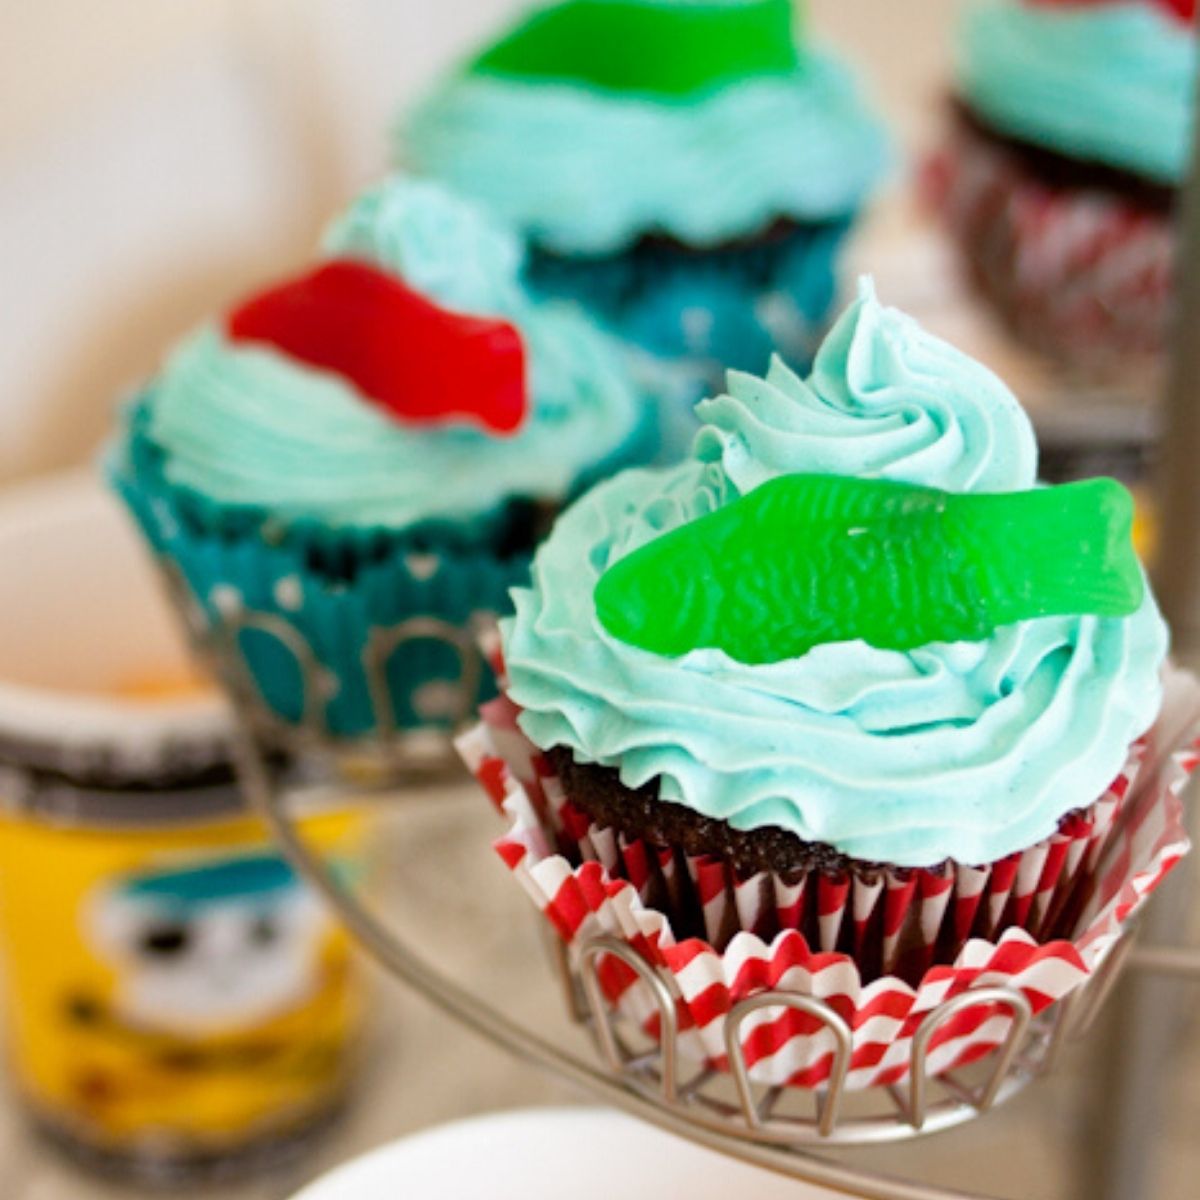 Pirate party cupcakes featuring blue frosting with Swedish fish.